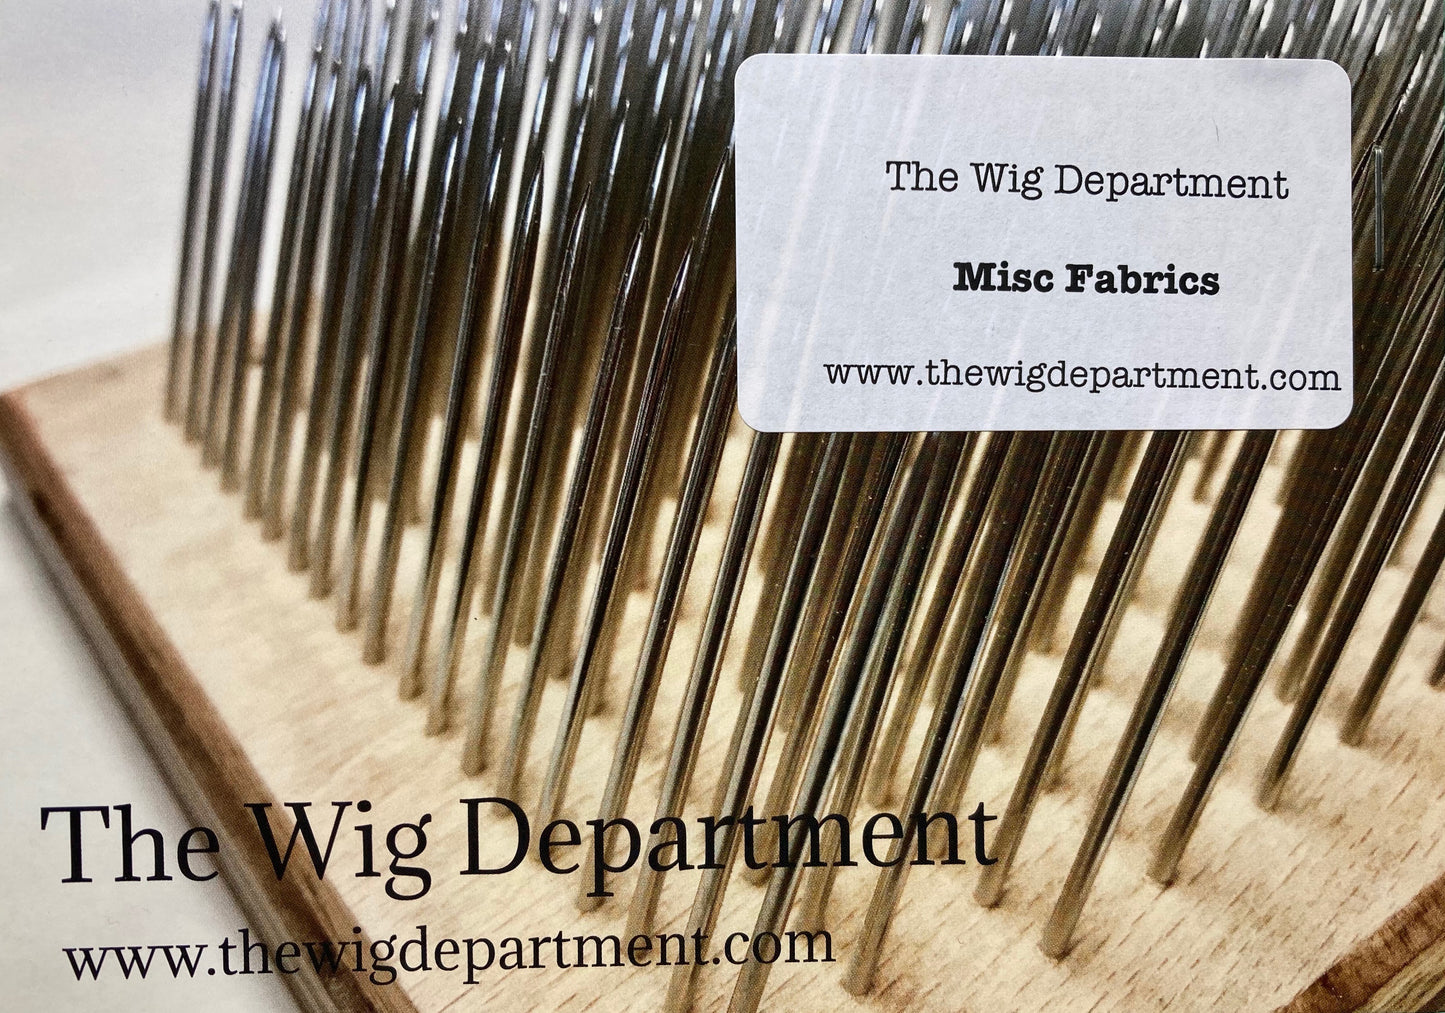 Wig making fabrics - The Wig Department